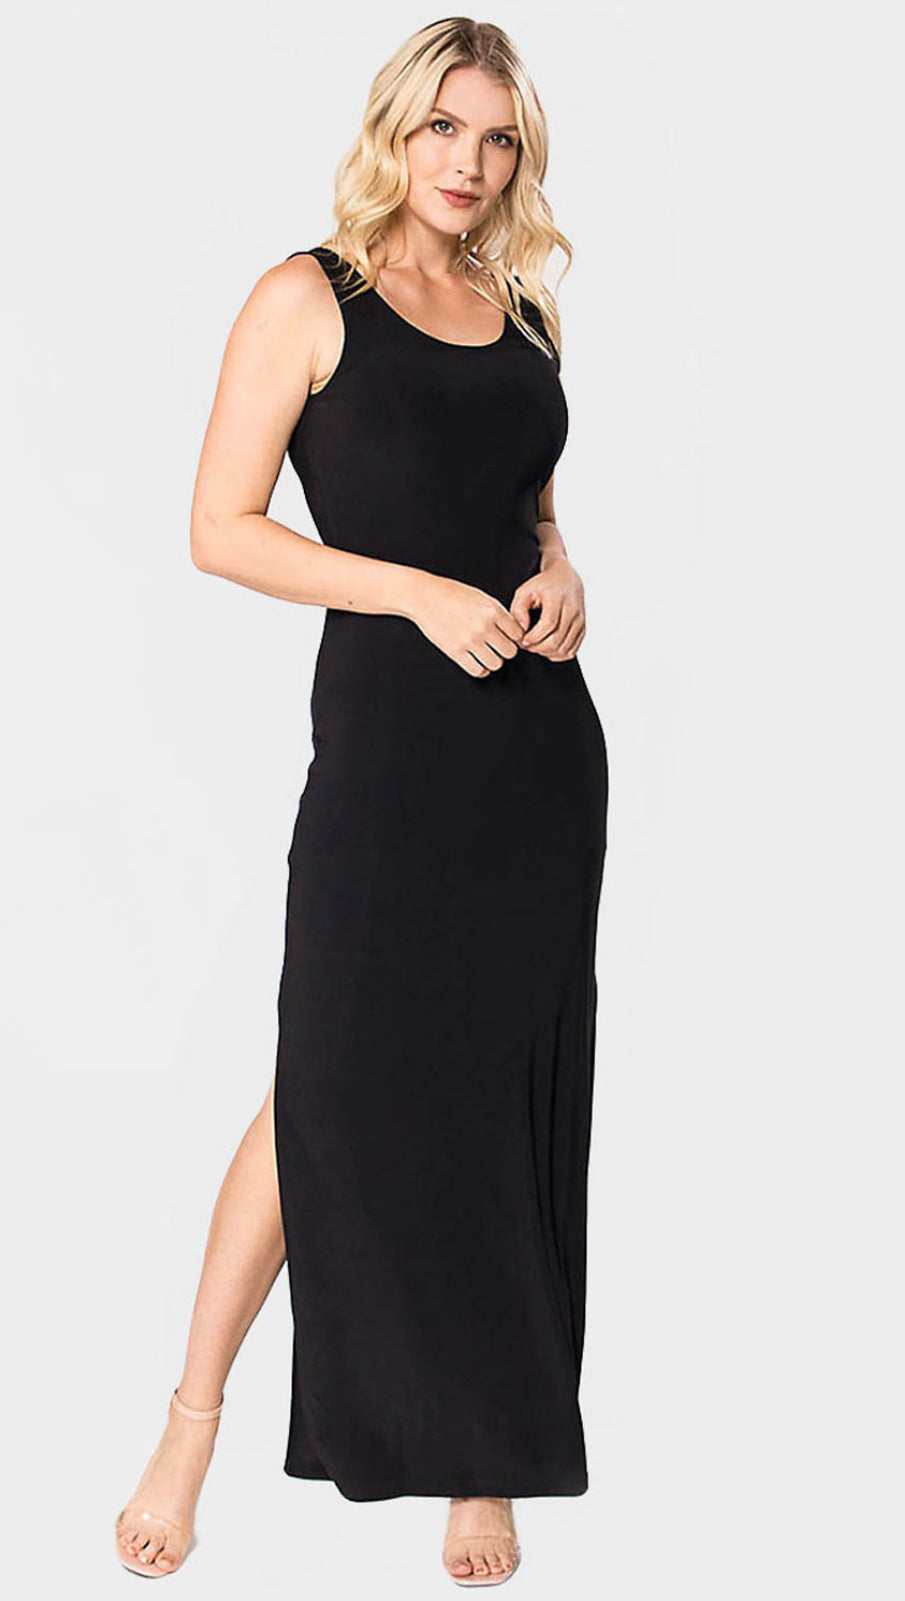 Maxi Dress with Side Slits